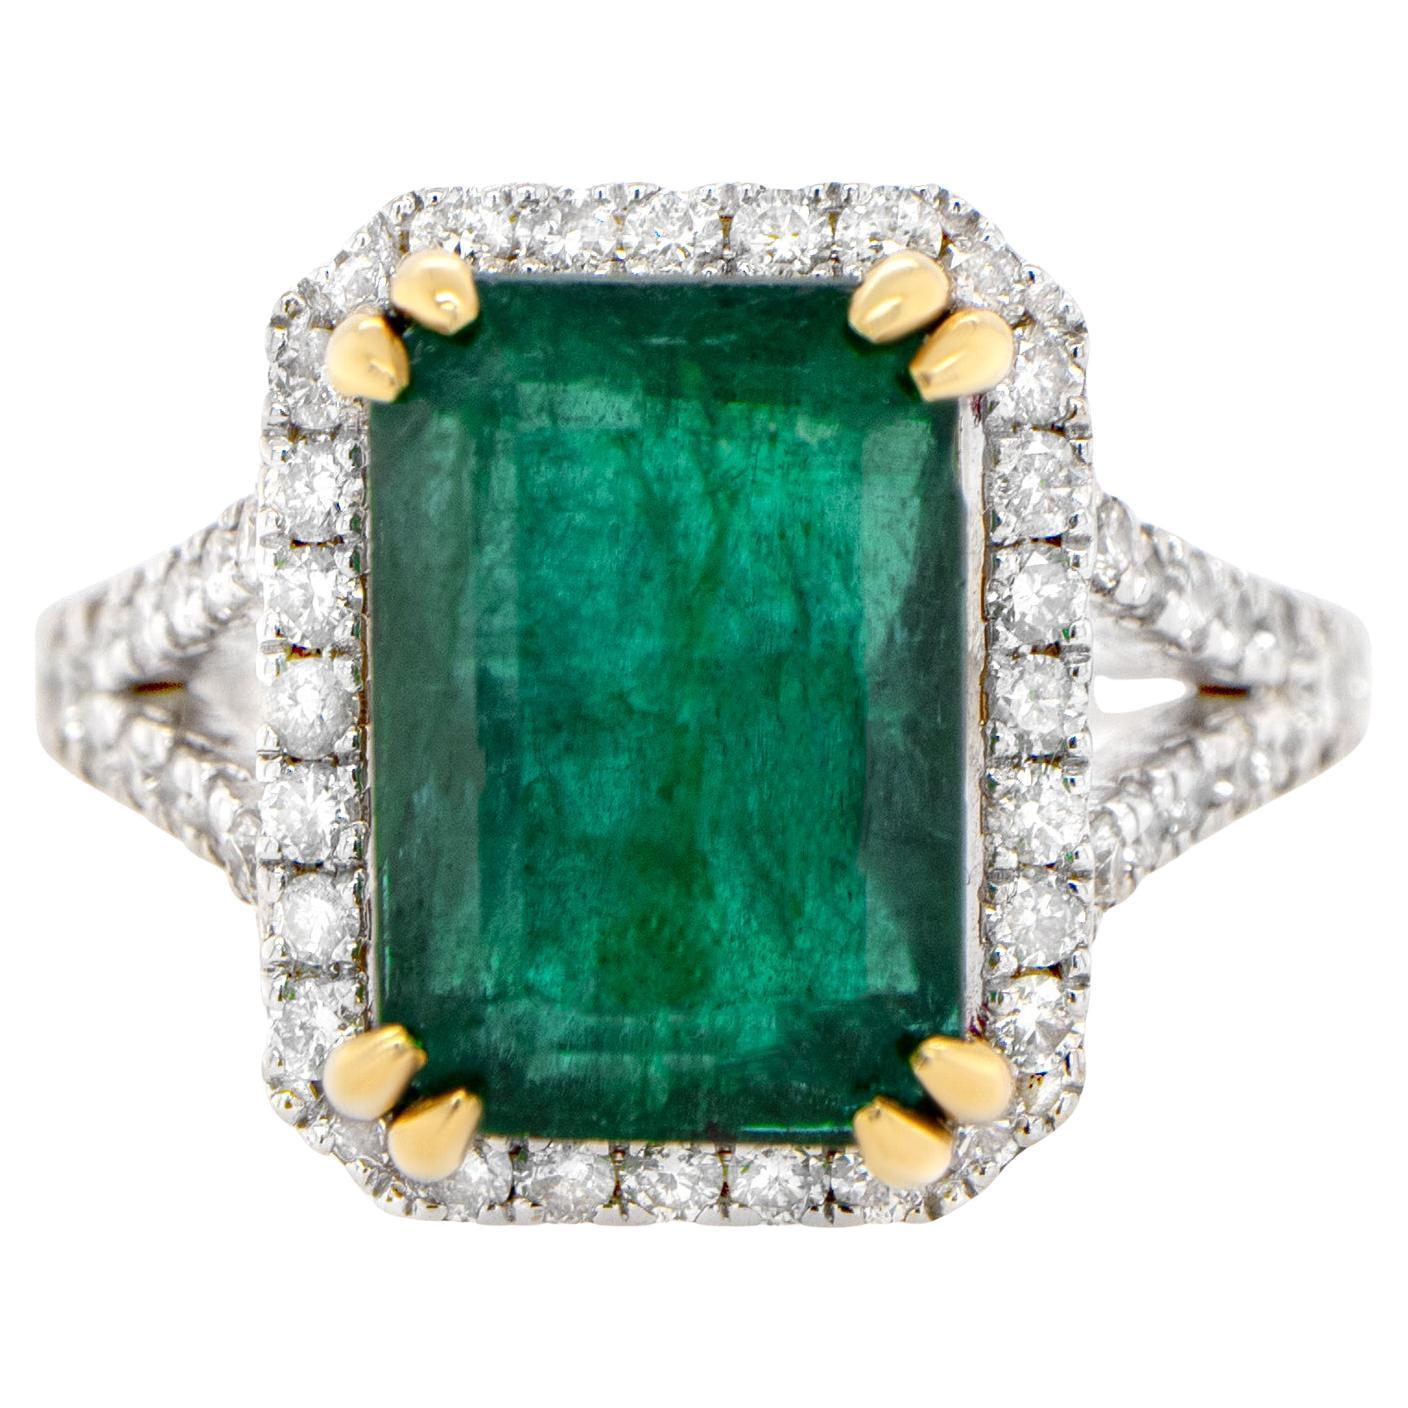 Emerald Ring With Diamond Setting 7.18 Carats 18K Gold For Sale